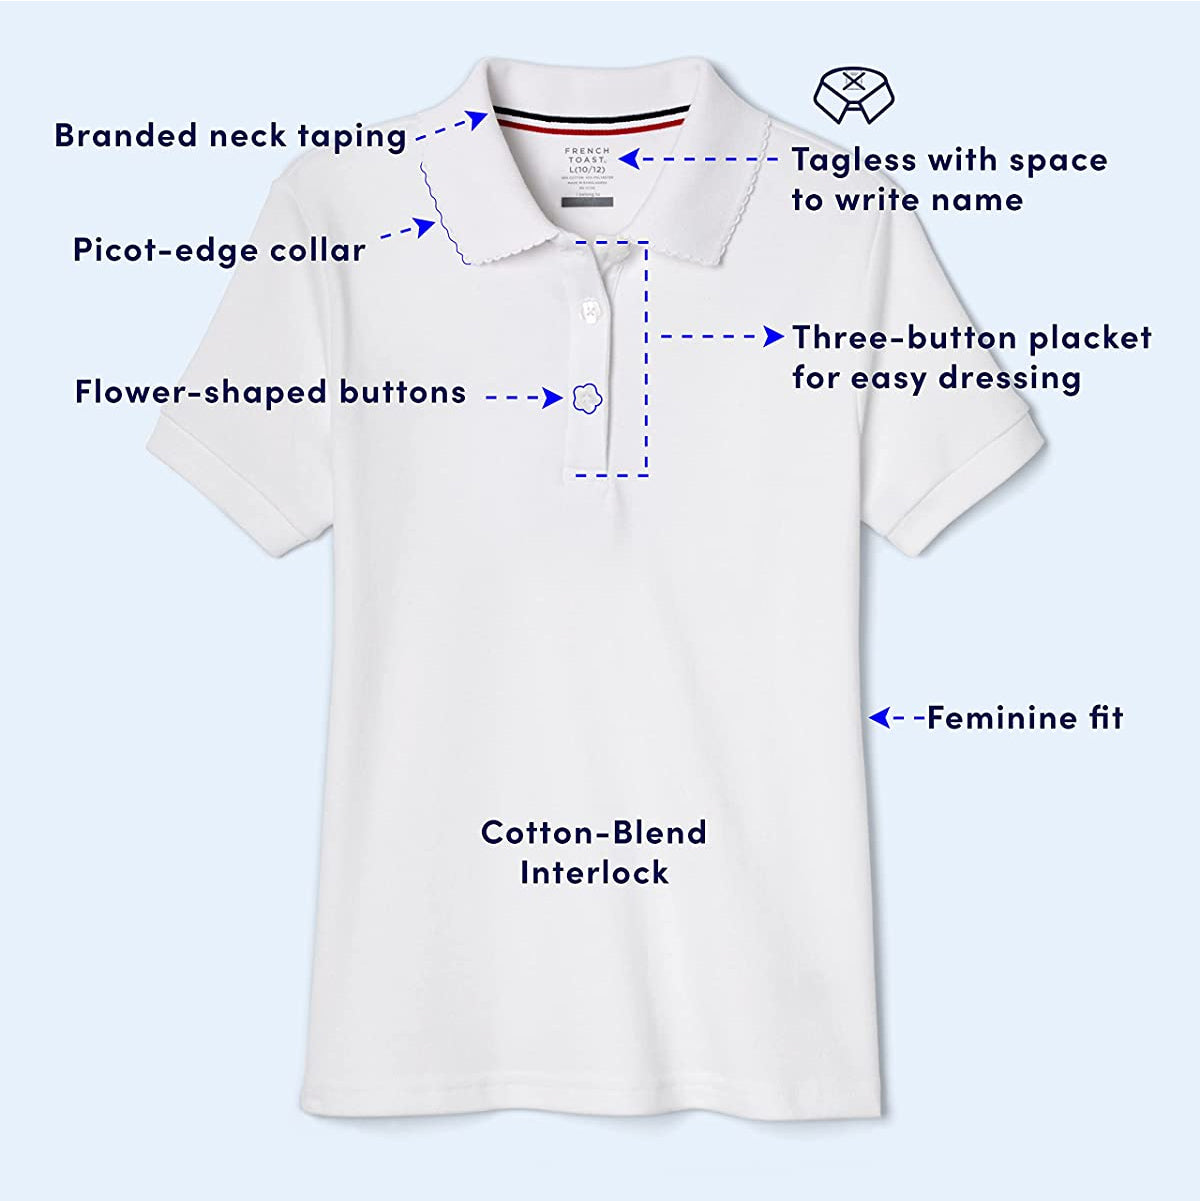 French Toast Girls 7-20 Short Sleeve Interlock Polo with Picot Collar